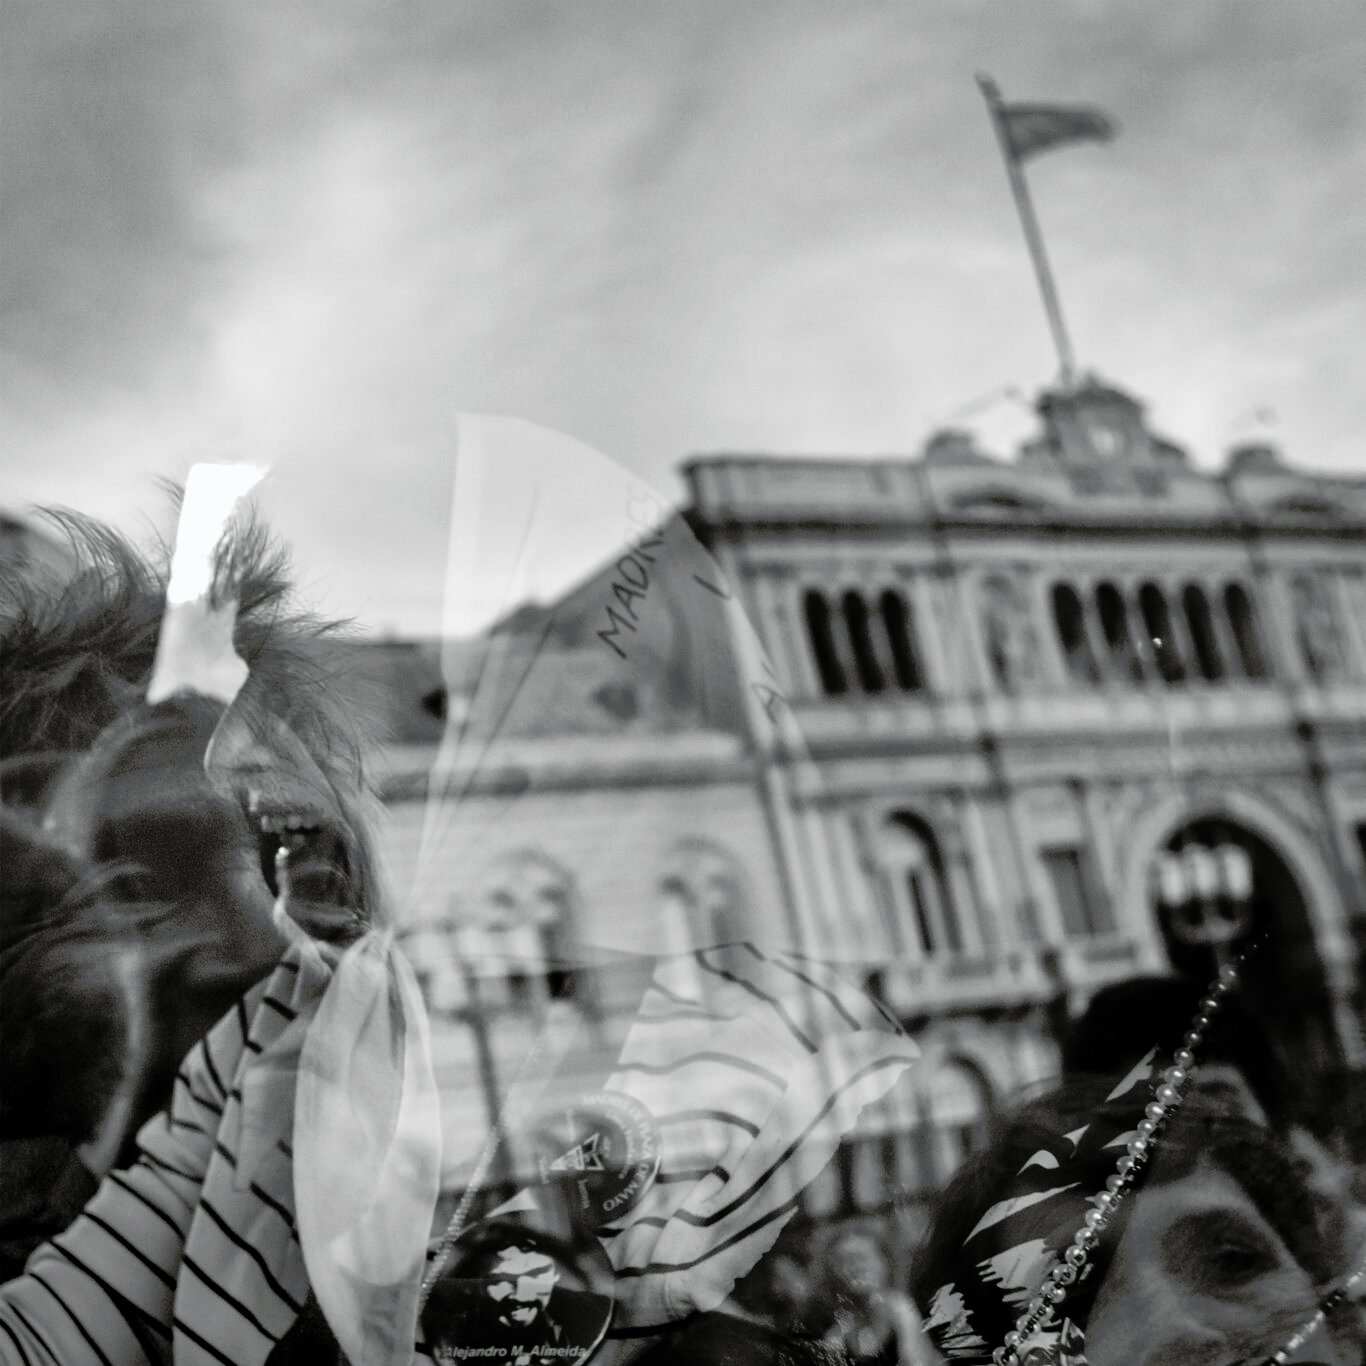 Reflection of woman from Argentinian Mothers of the Plaza de Mayo in a window, and governmental building on the background.